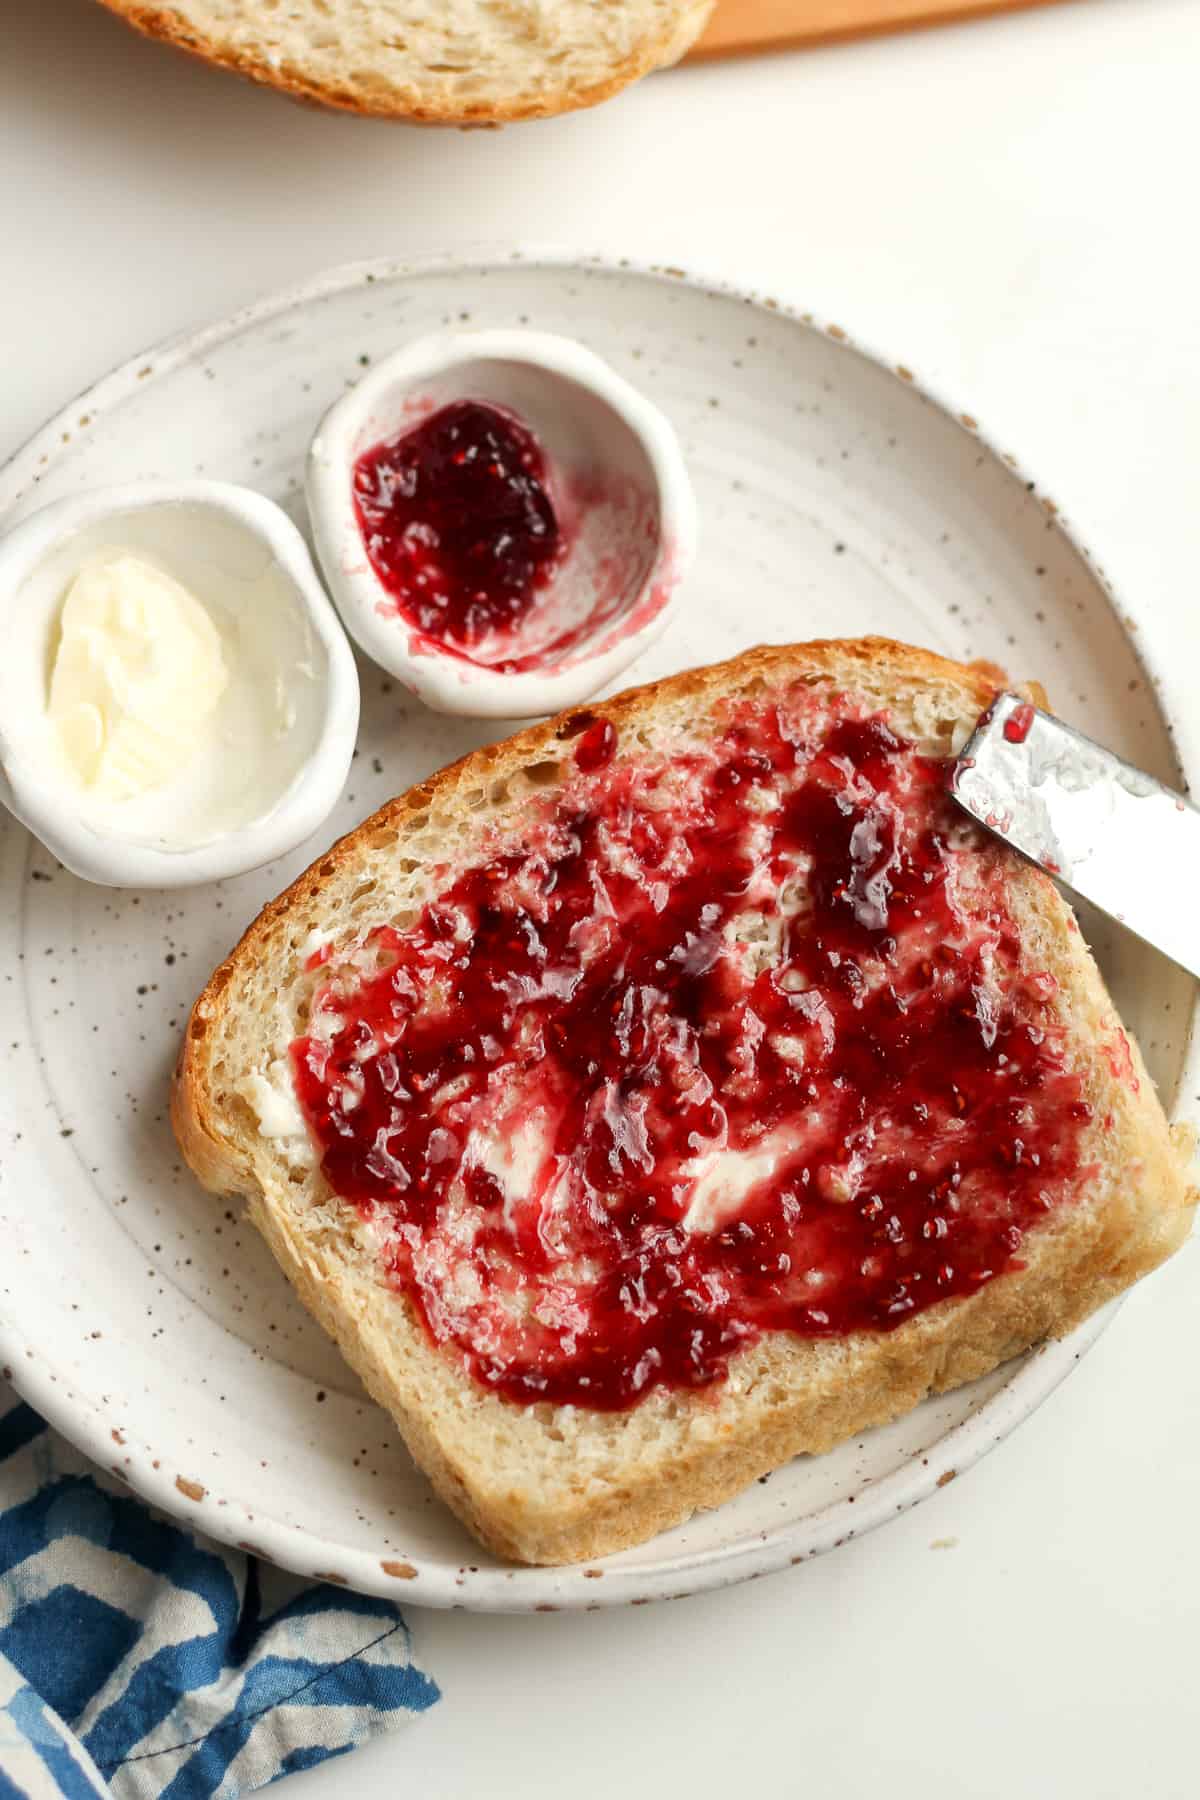 A plate of a piece of bread with butter and jelly.